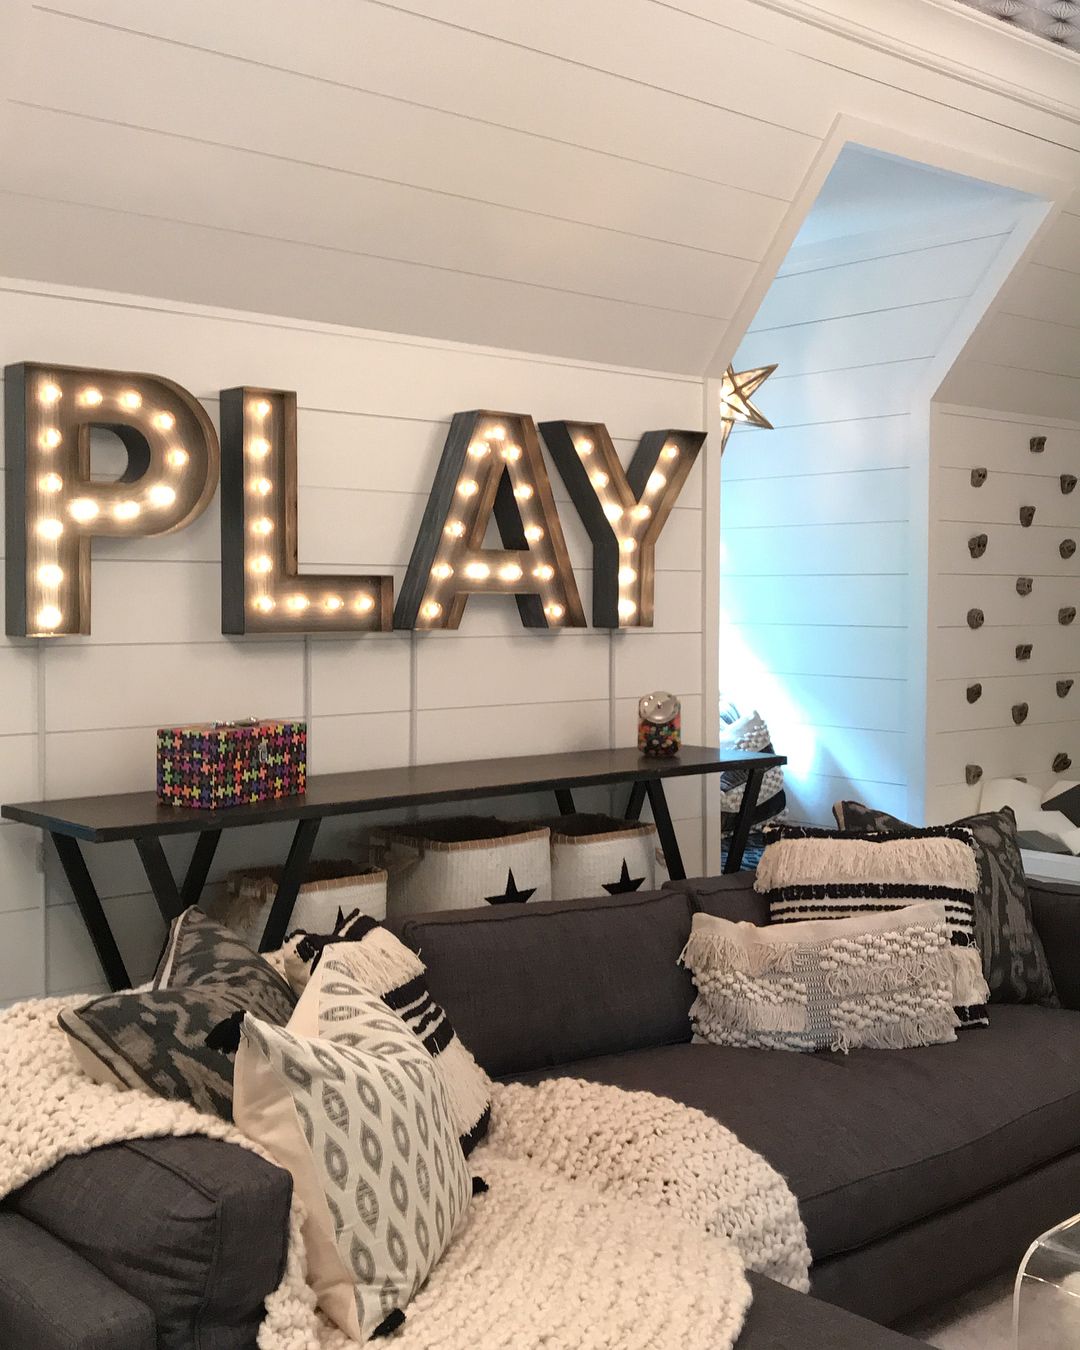 LINEN & FLAX CO. on Instagram: “Take a look at our recent project...Playroom Dreams! Every inch of this space is filled with form, function and whimsy! The black and white…”